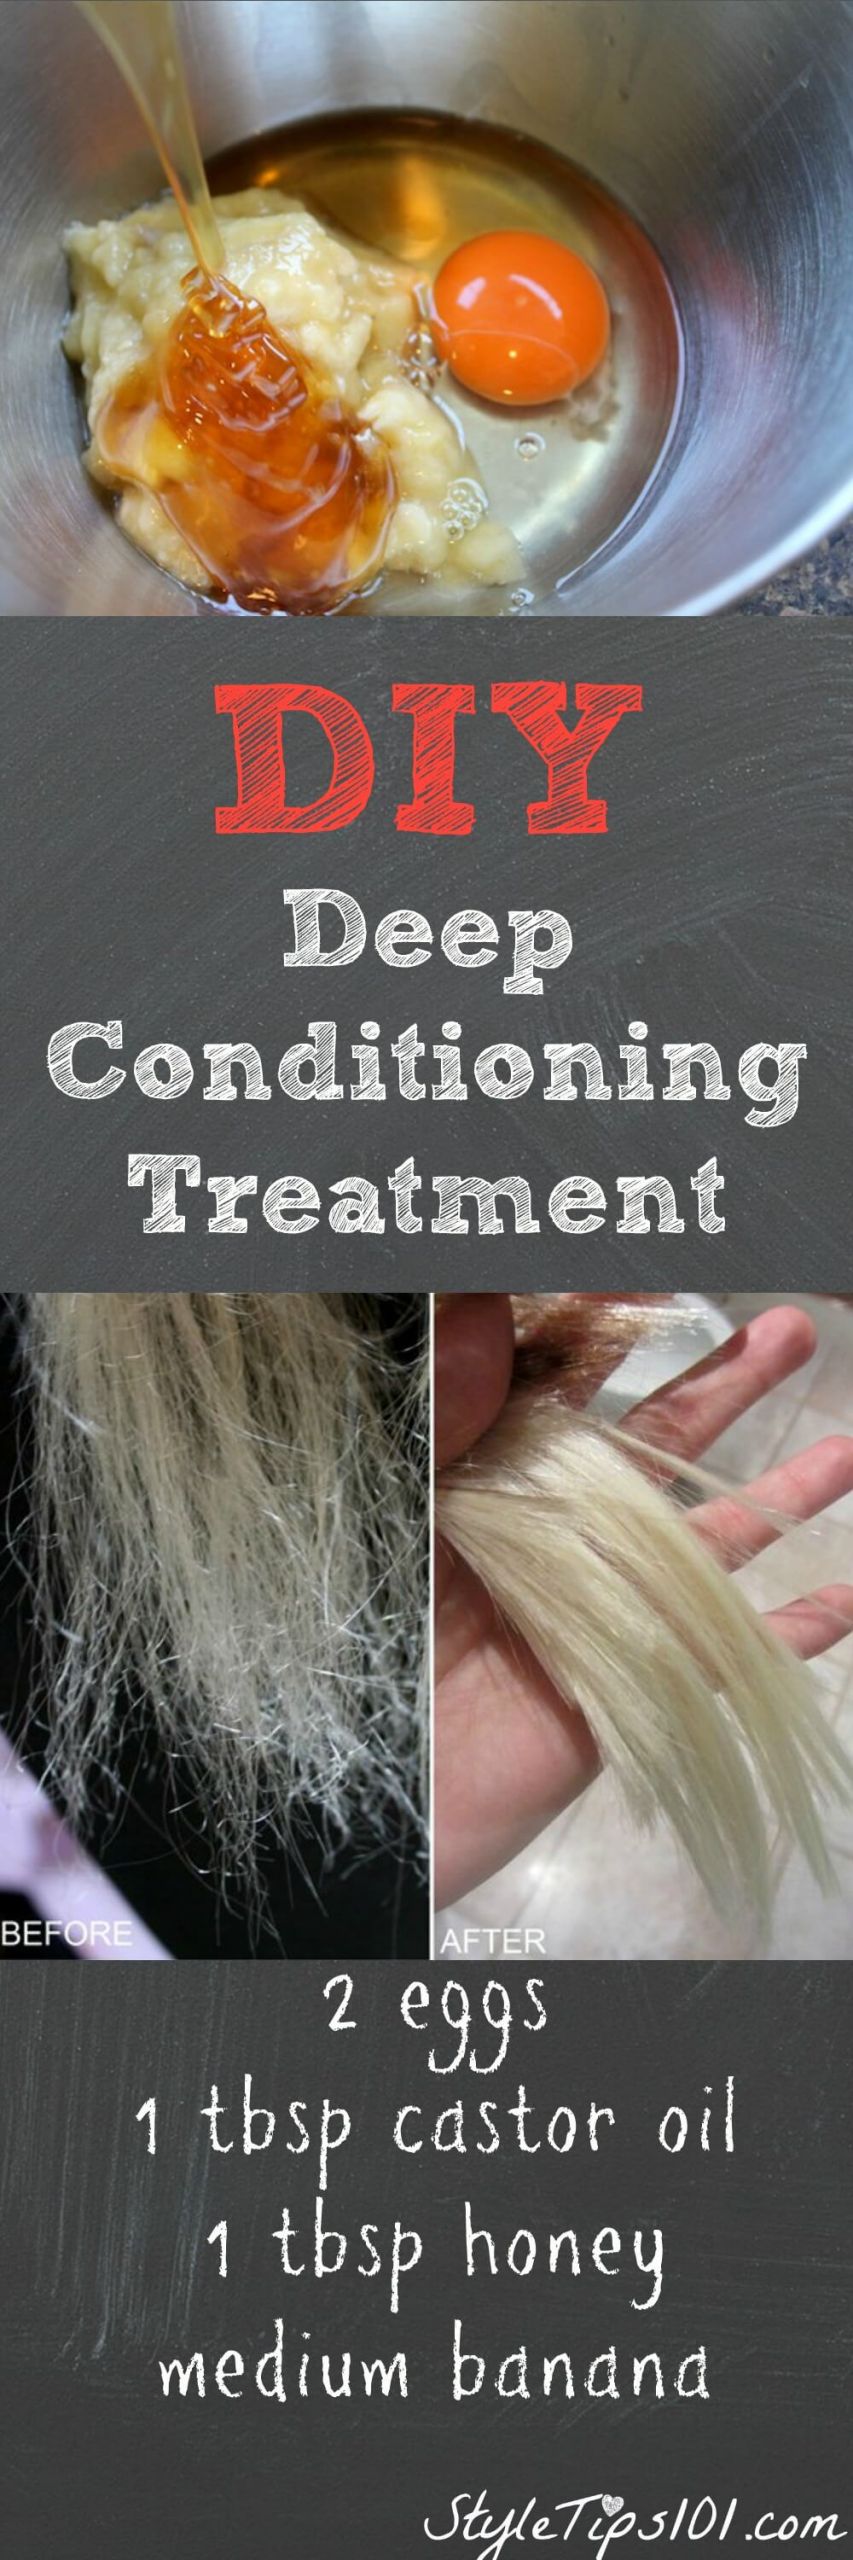 DIY Hair Treatment
 DIY Deep Conditioning Treatment With Egg and Castor Oil